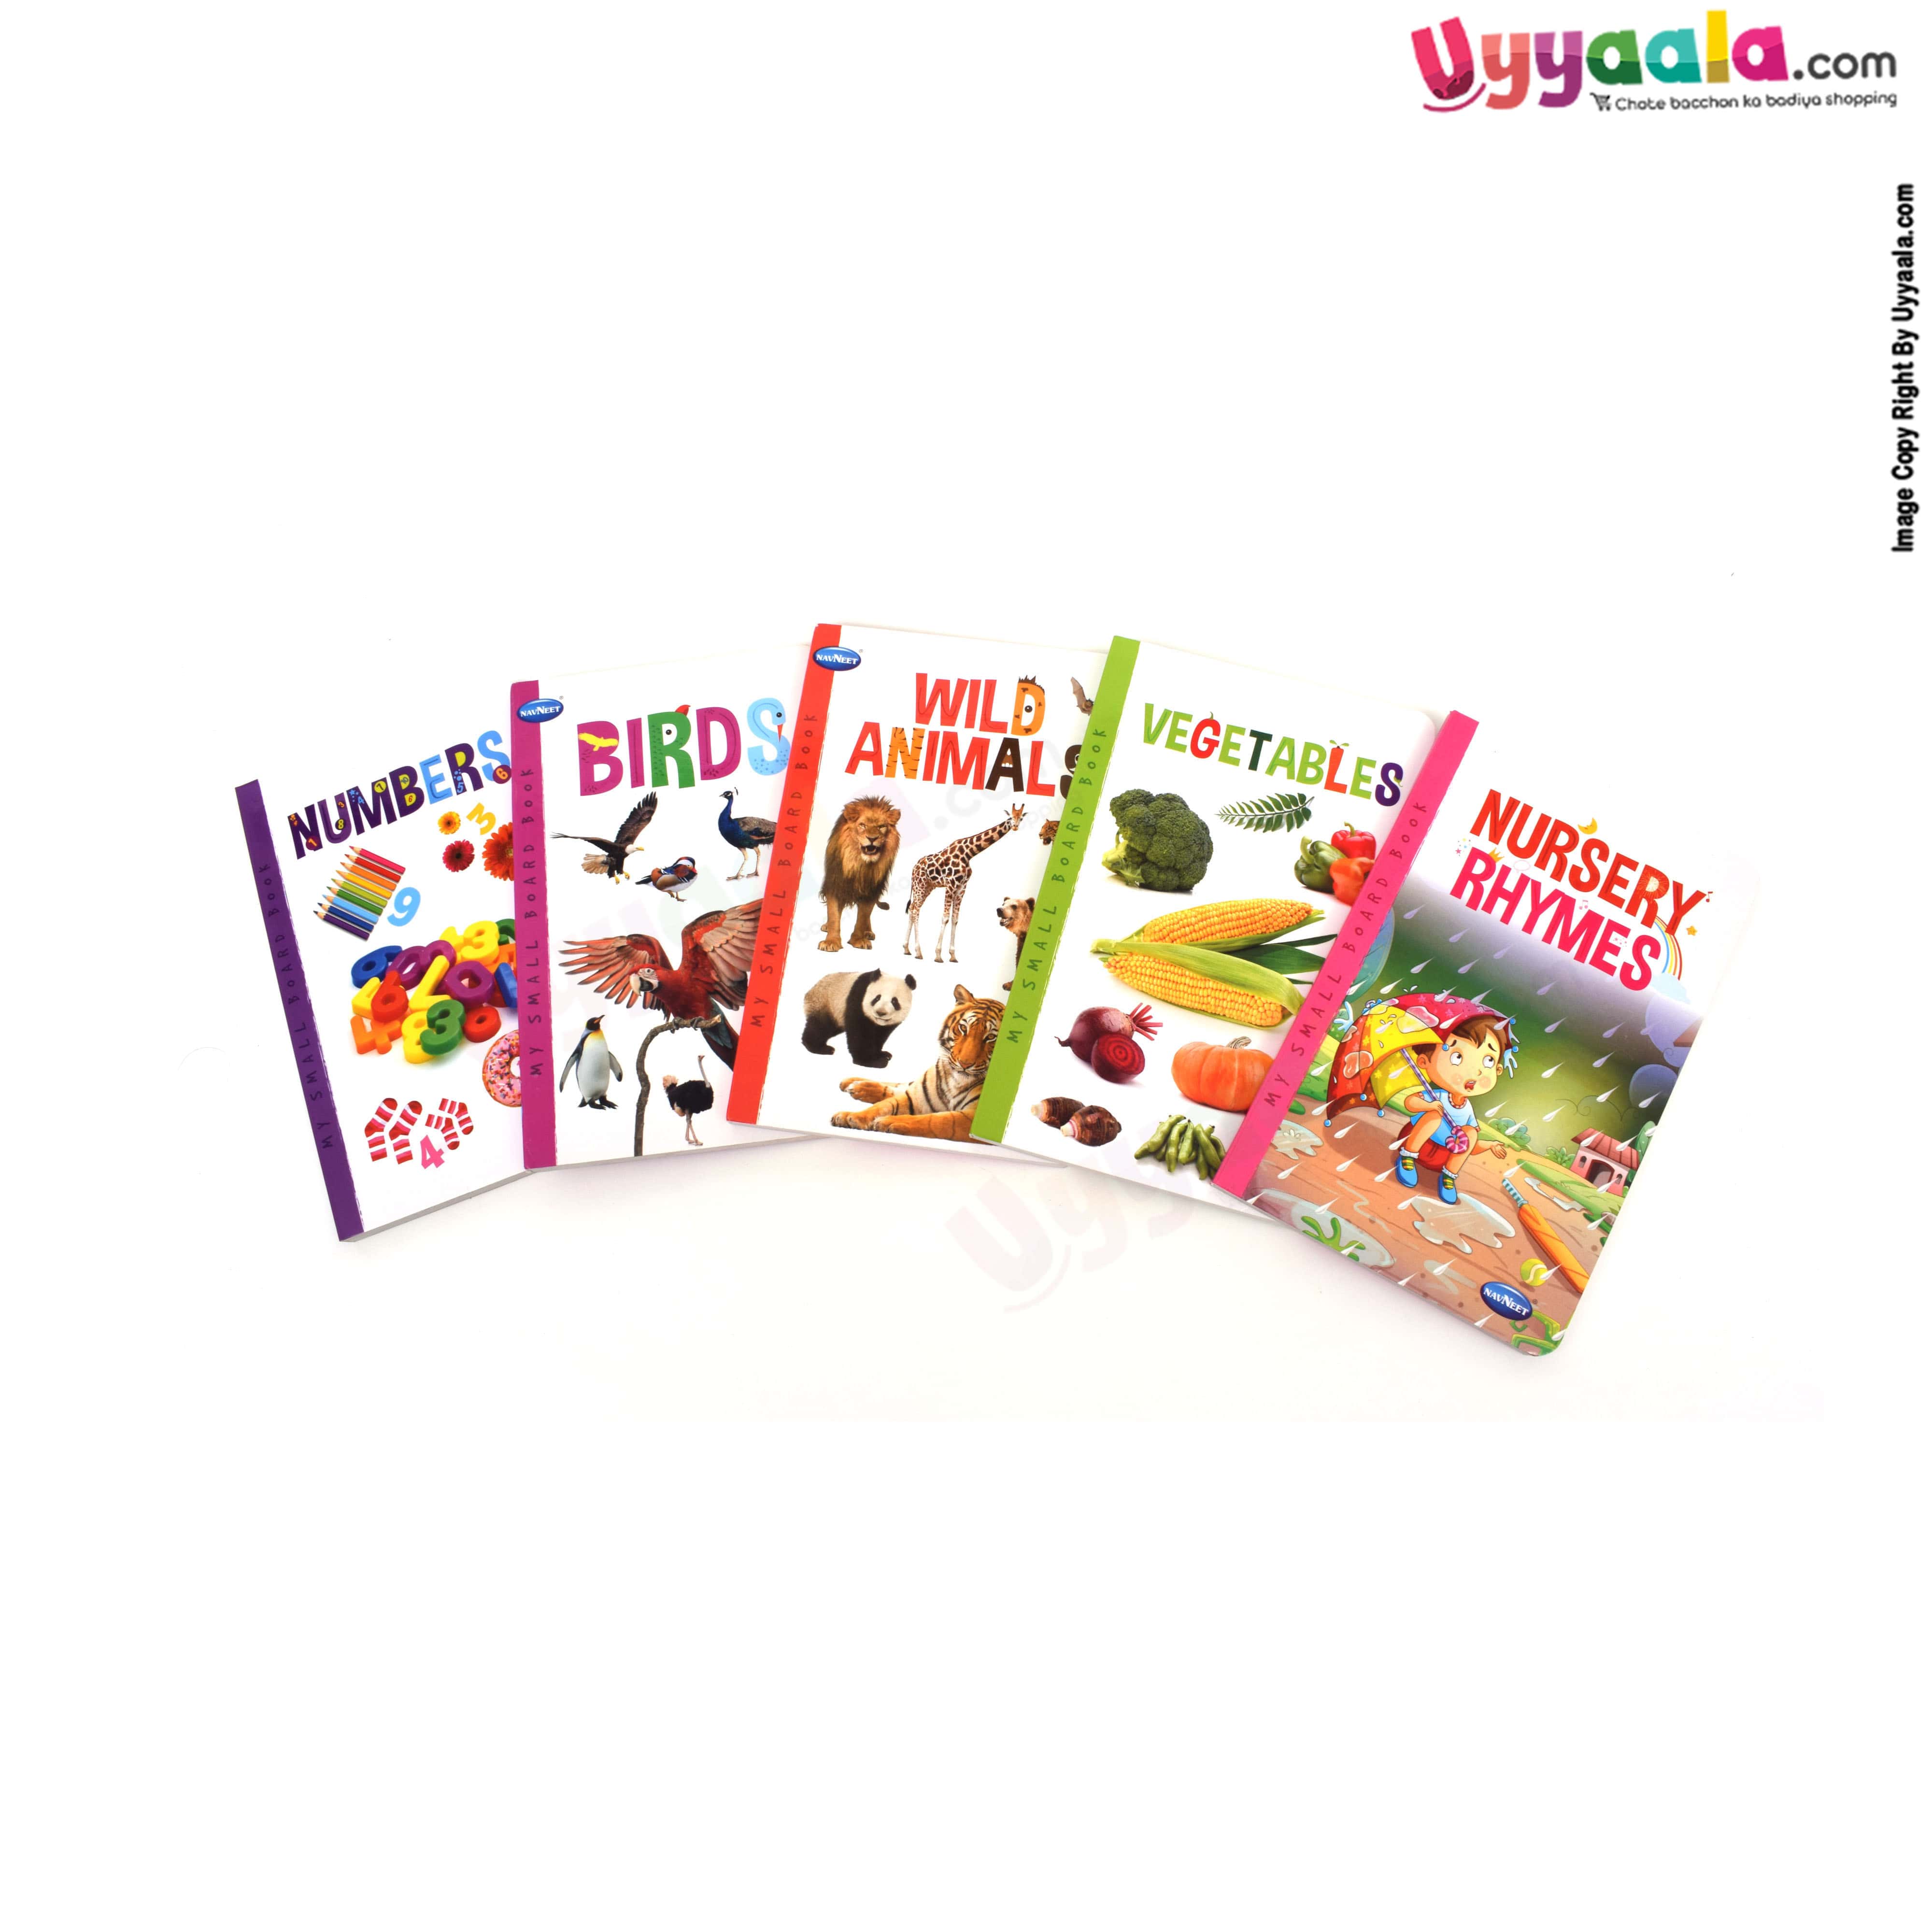 NAVNEET my small board books pack of 5 - 1 - 5 years